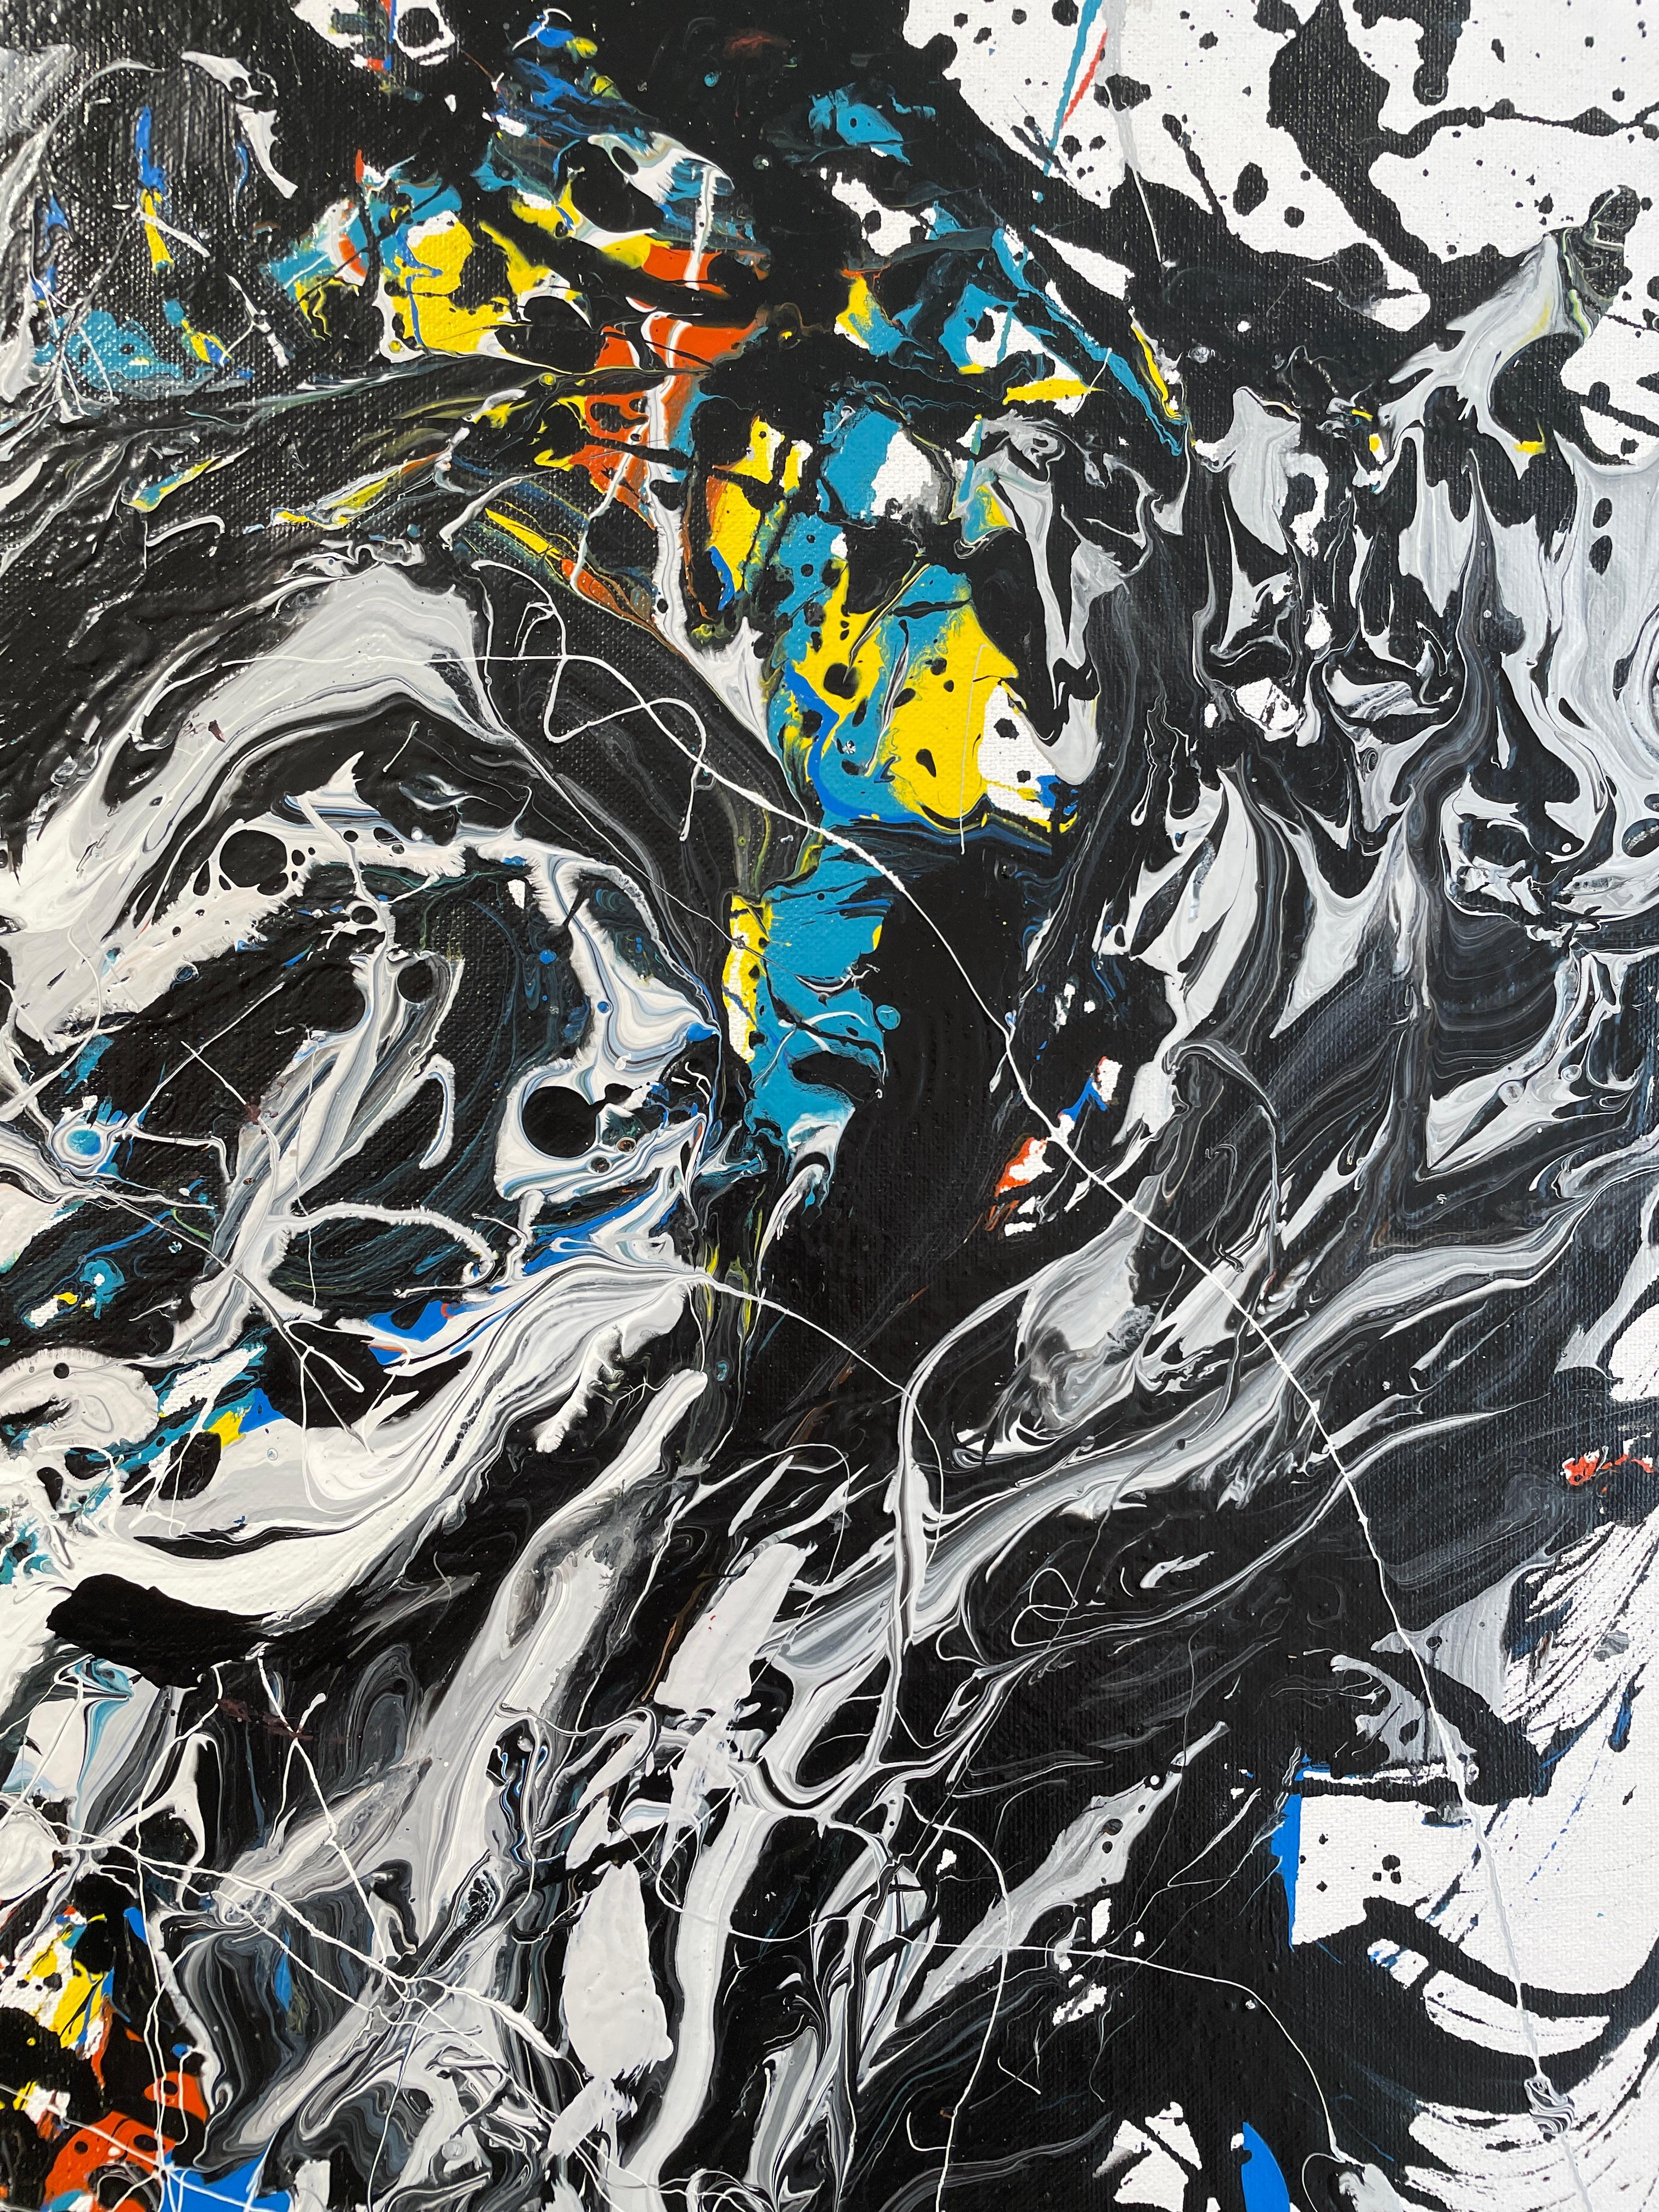 Presenting 'Naiad,' a stunning abstract portrait by Masri, celebrated for its vivacious flow and splatter techniques. This singular piece portrays a woman in profile, her form crisply delineated in black amidst an energetic backdrop of drip and